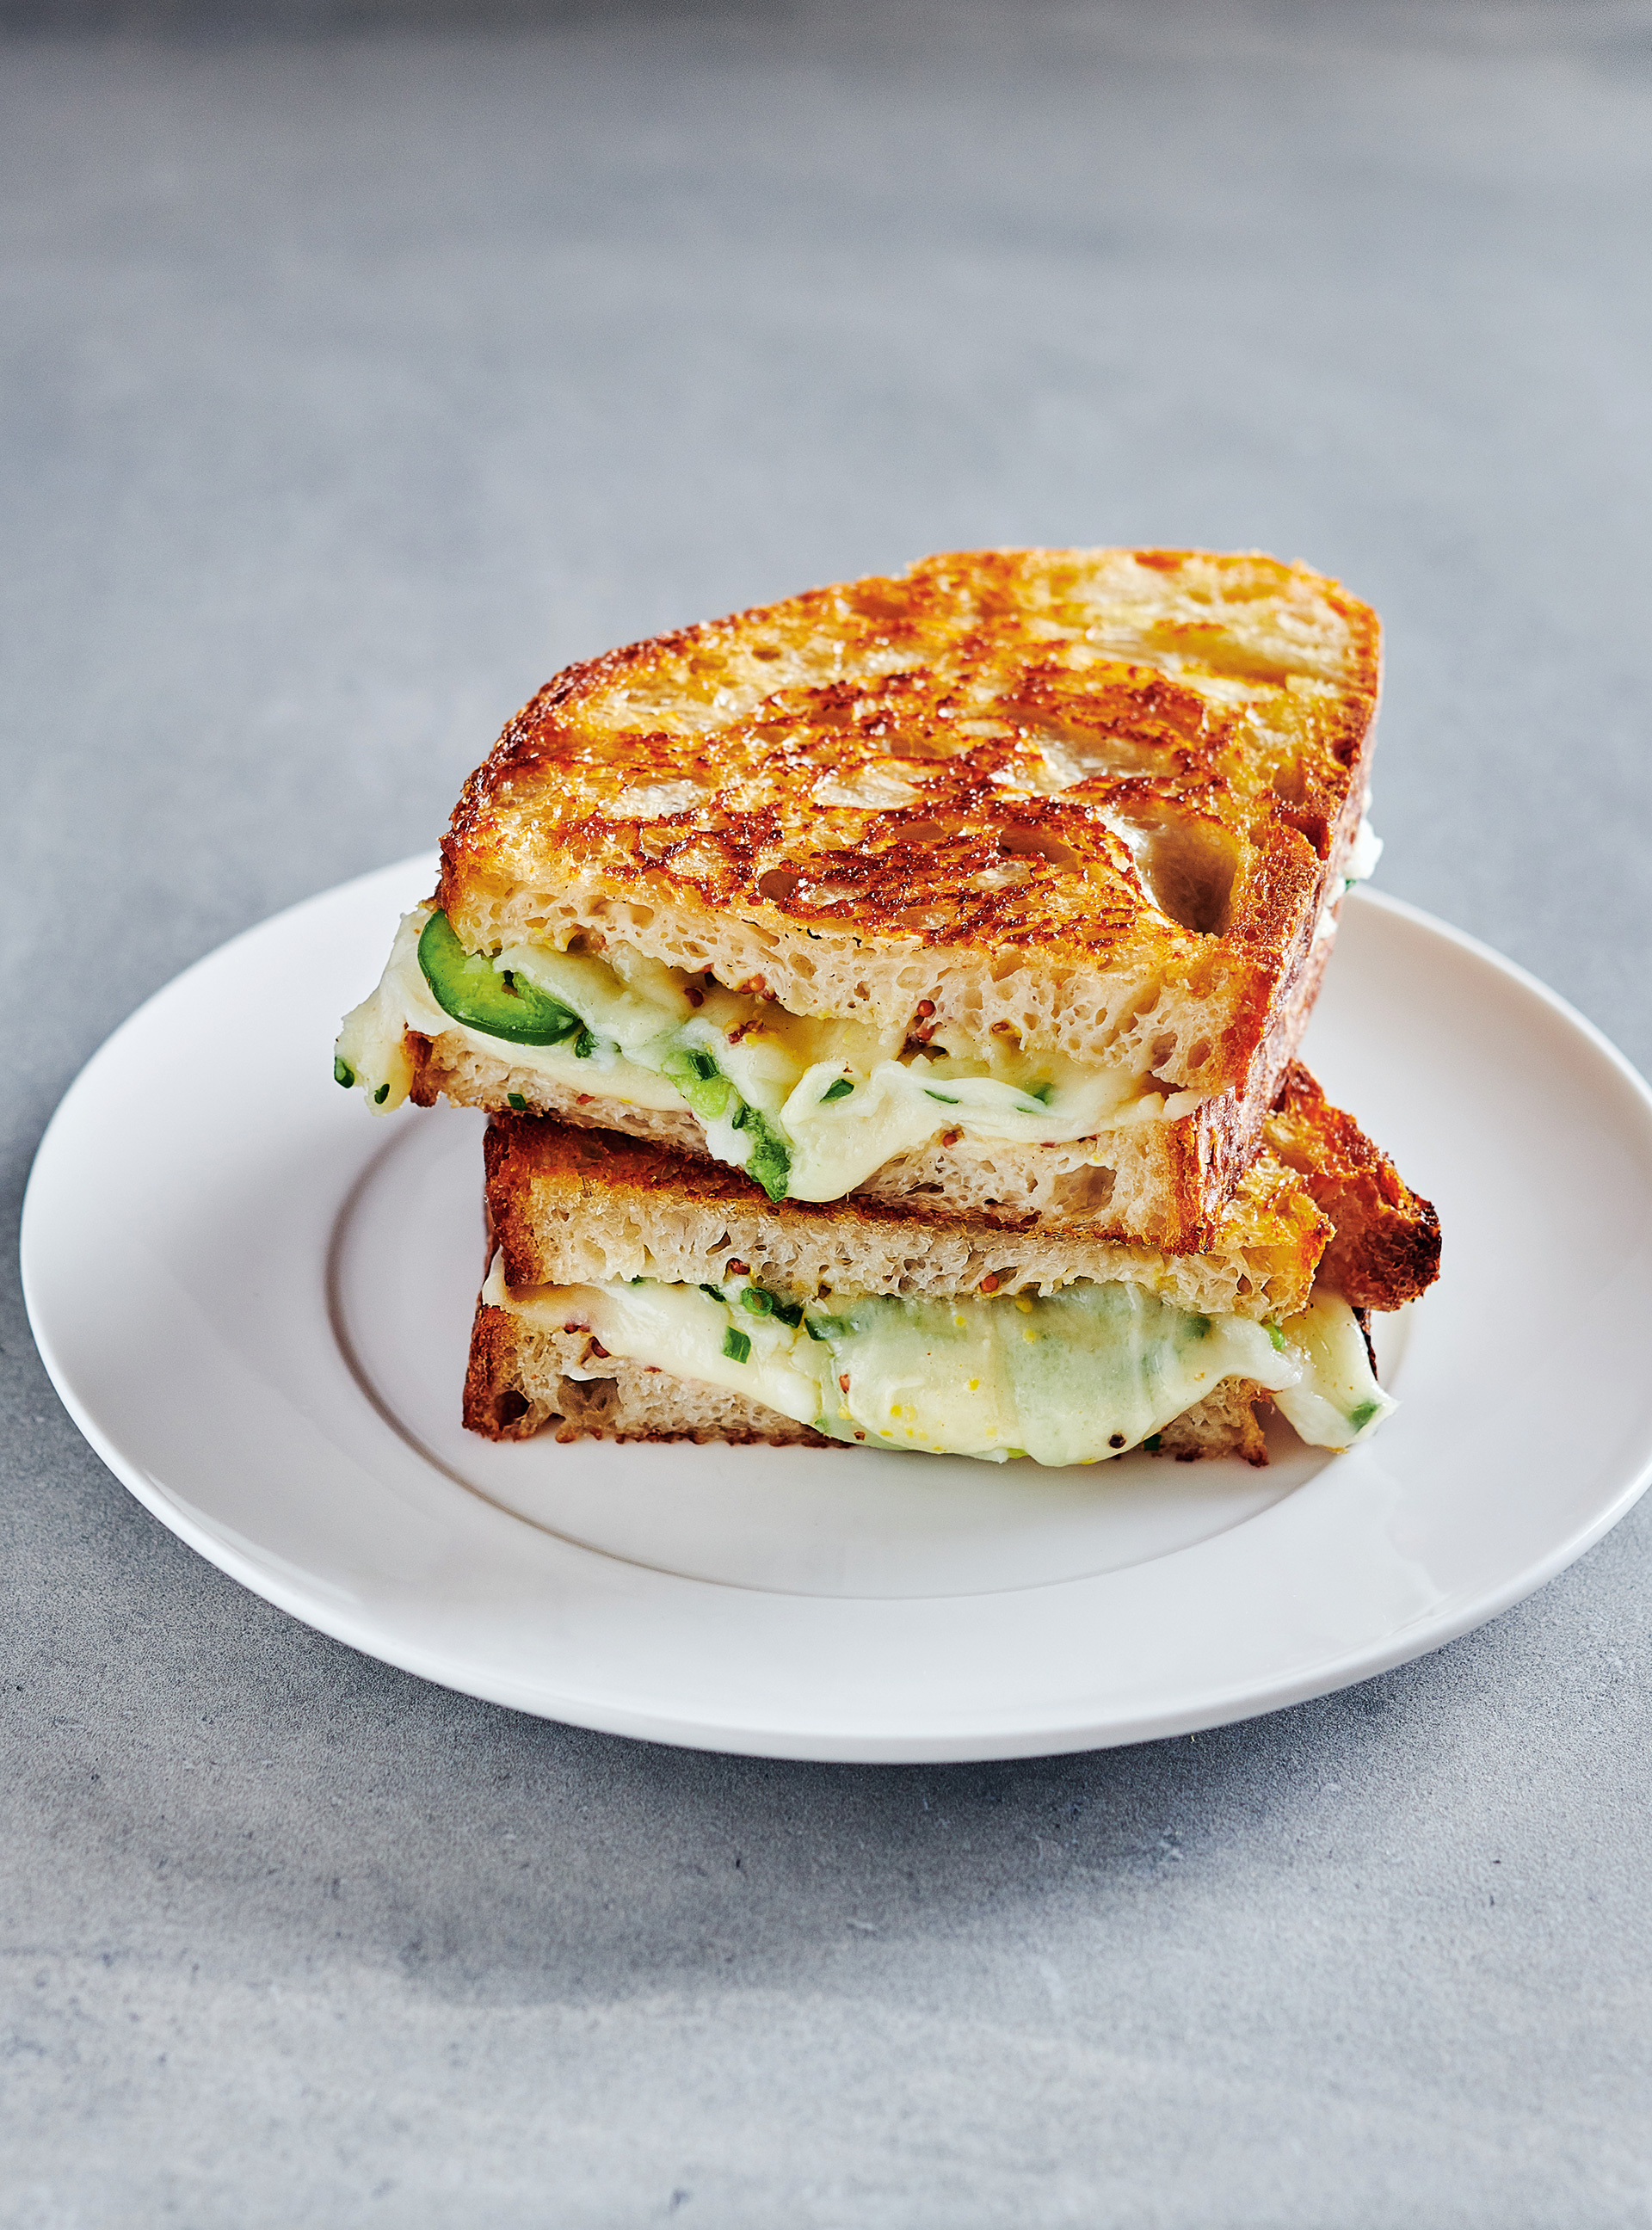 Mashed Potato and Gruyère Grilled Cheese